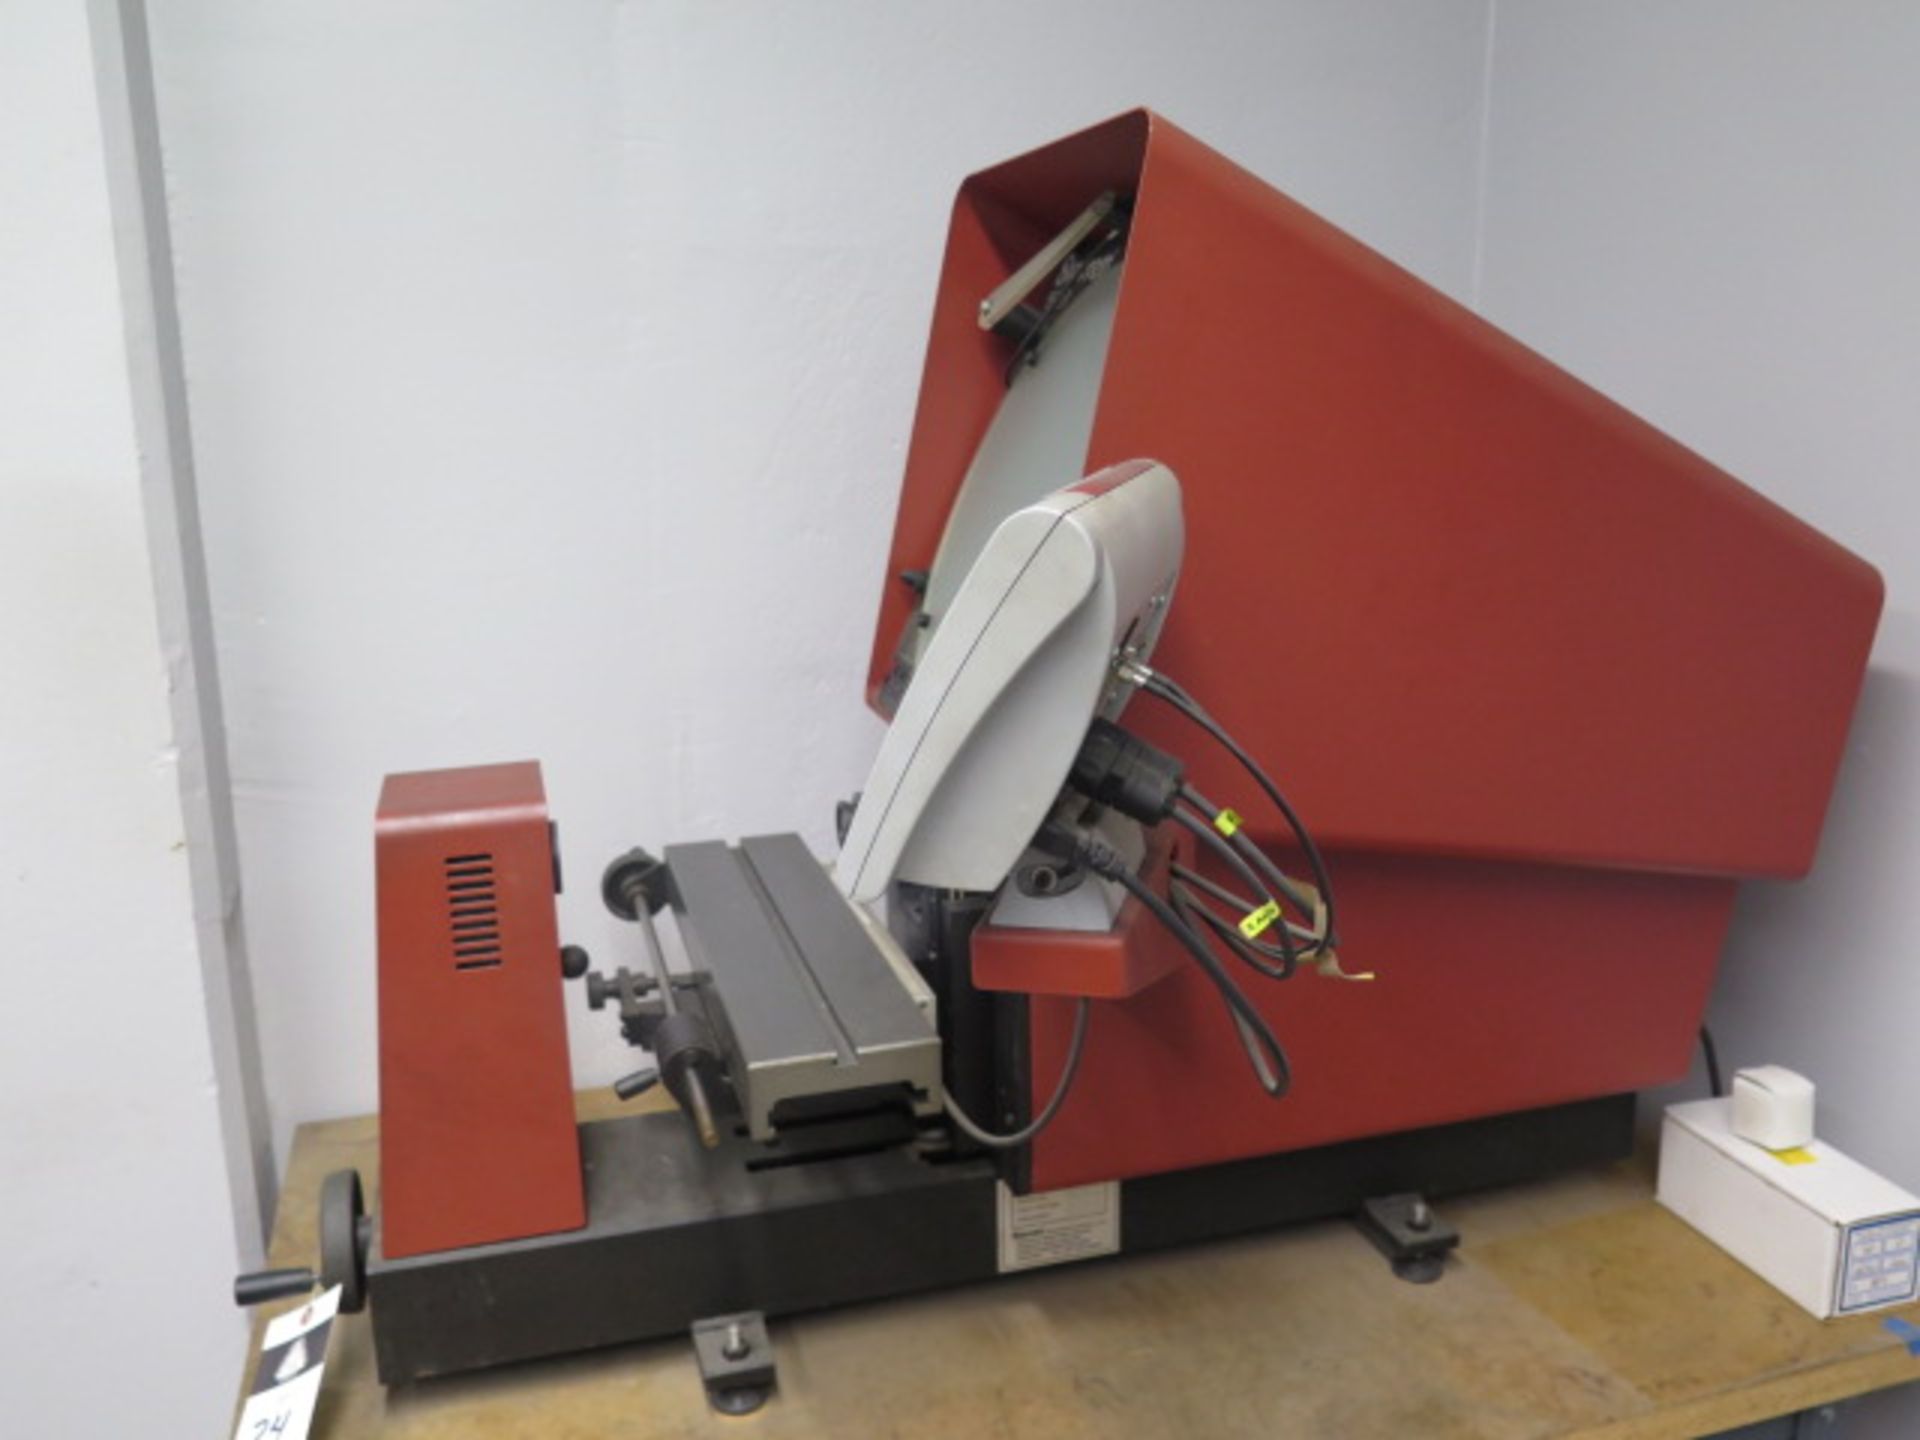 Starrett HE350 14” Optical Comparator s/n 40910 w/ Quadra-Chek 200 Programmable DRO, SOLD AS IS - Image 2 of 9